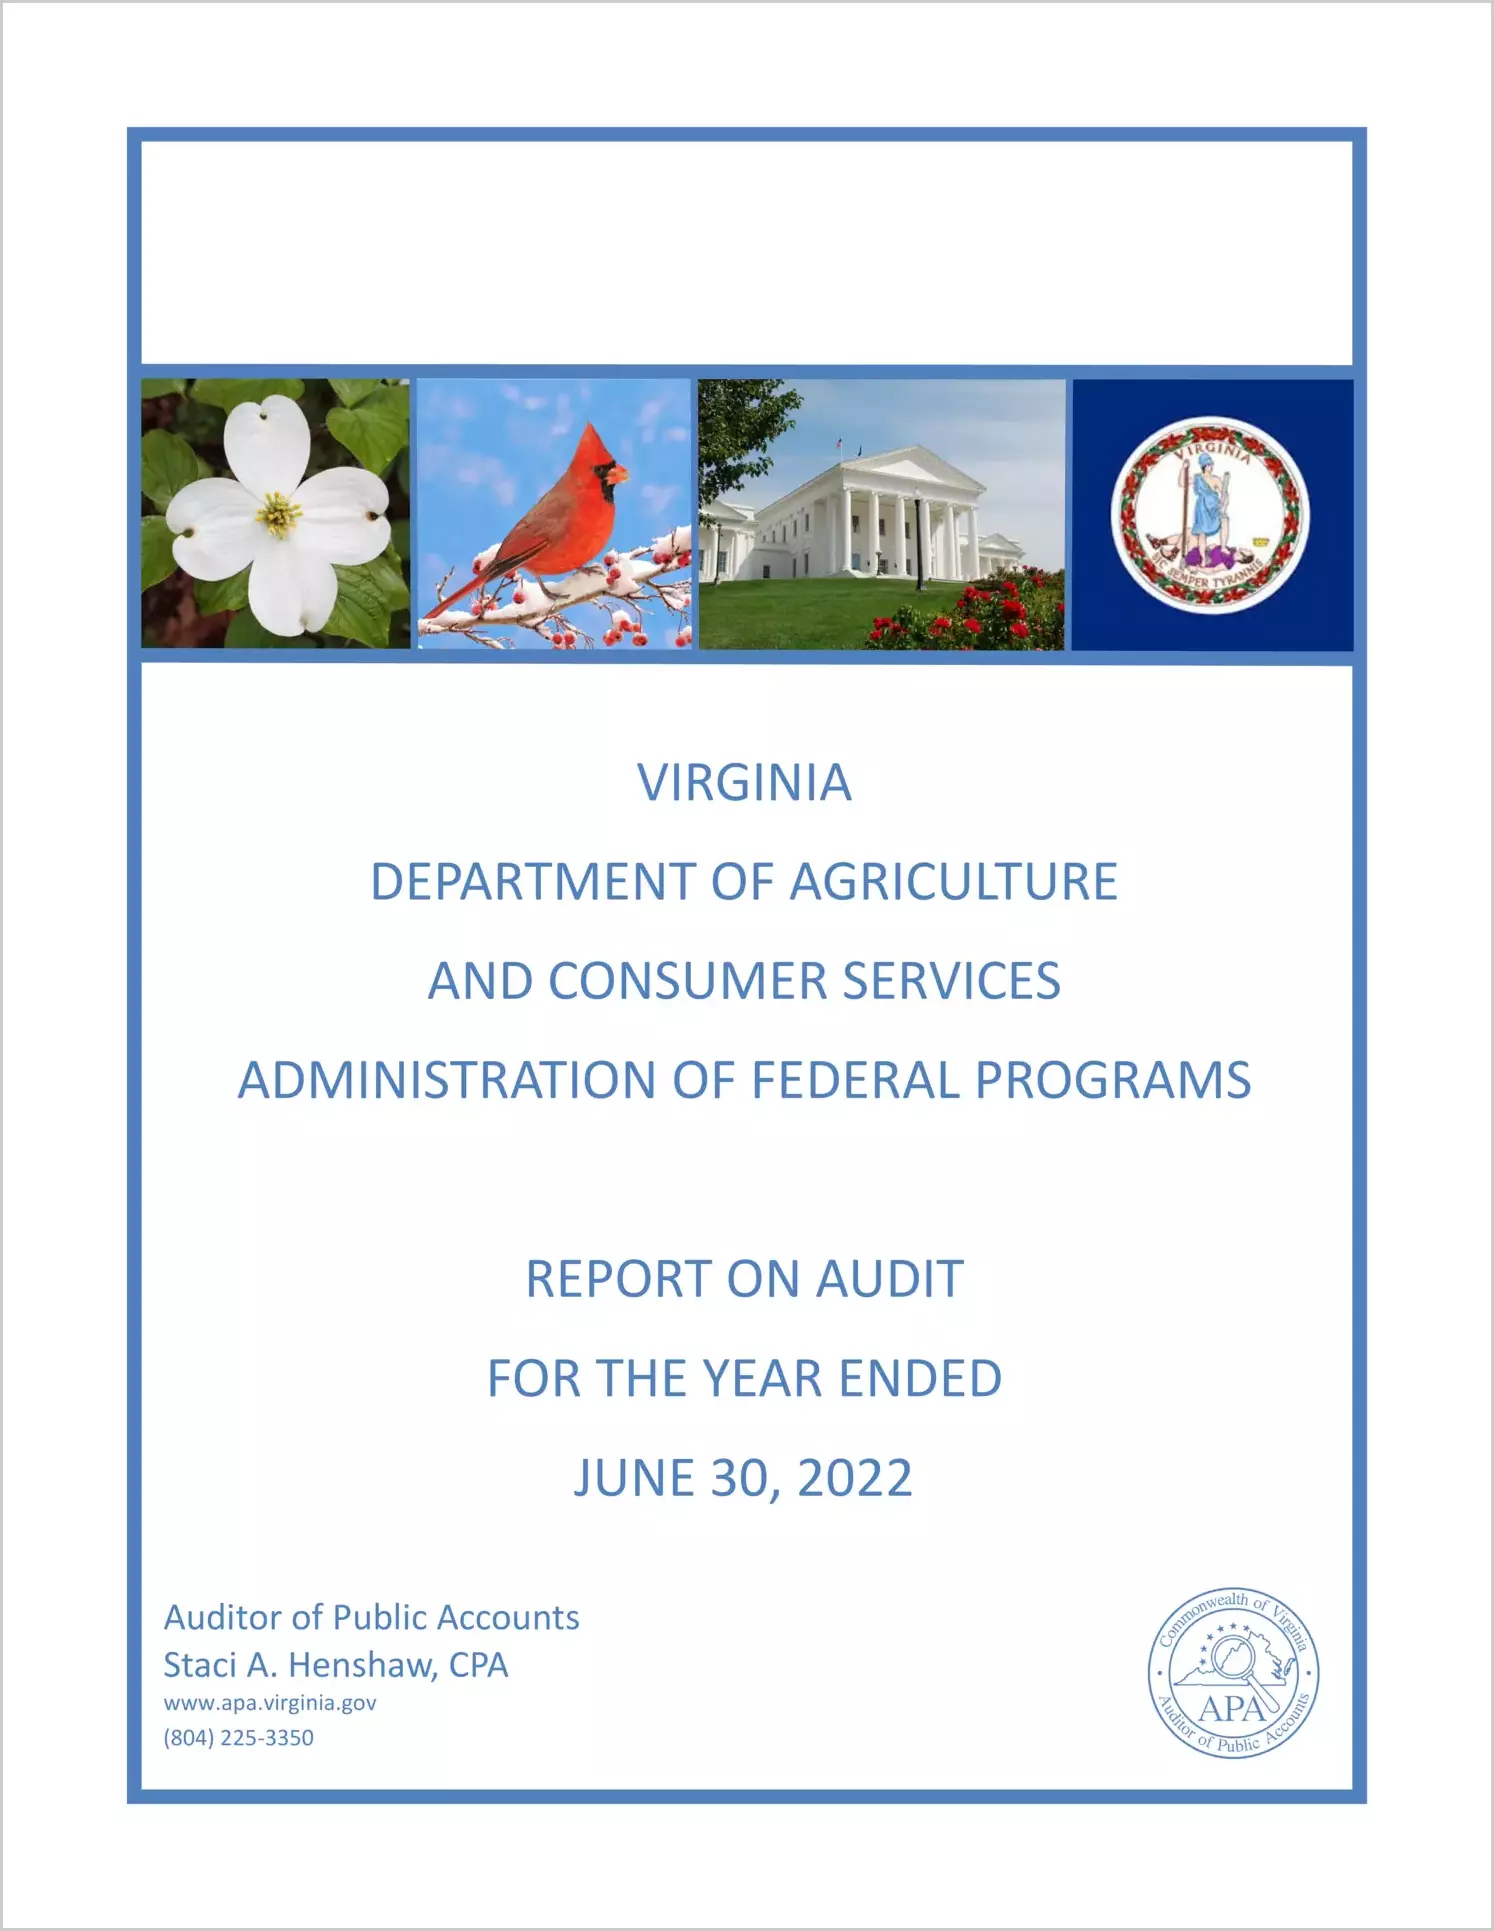 Virginia Department of Agriculture and Consumer Services Administration of Federal Programs for the year ended June 30, 2022